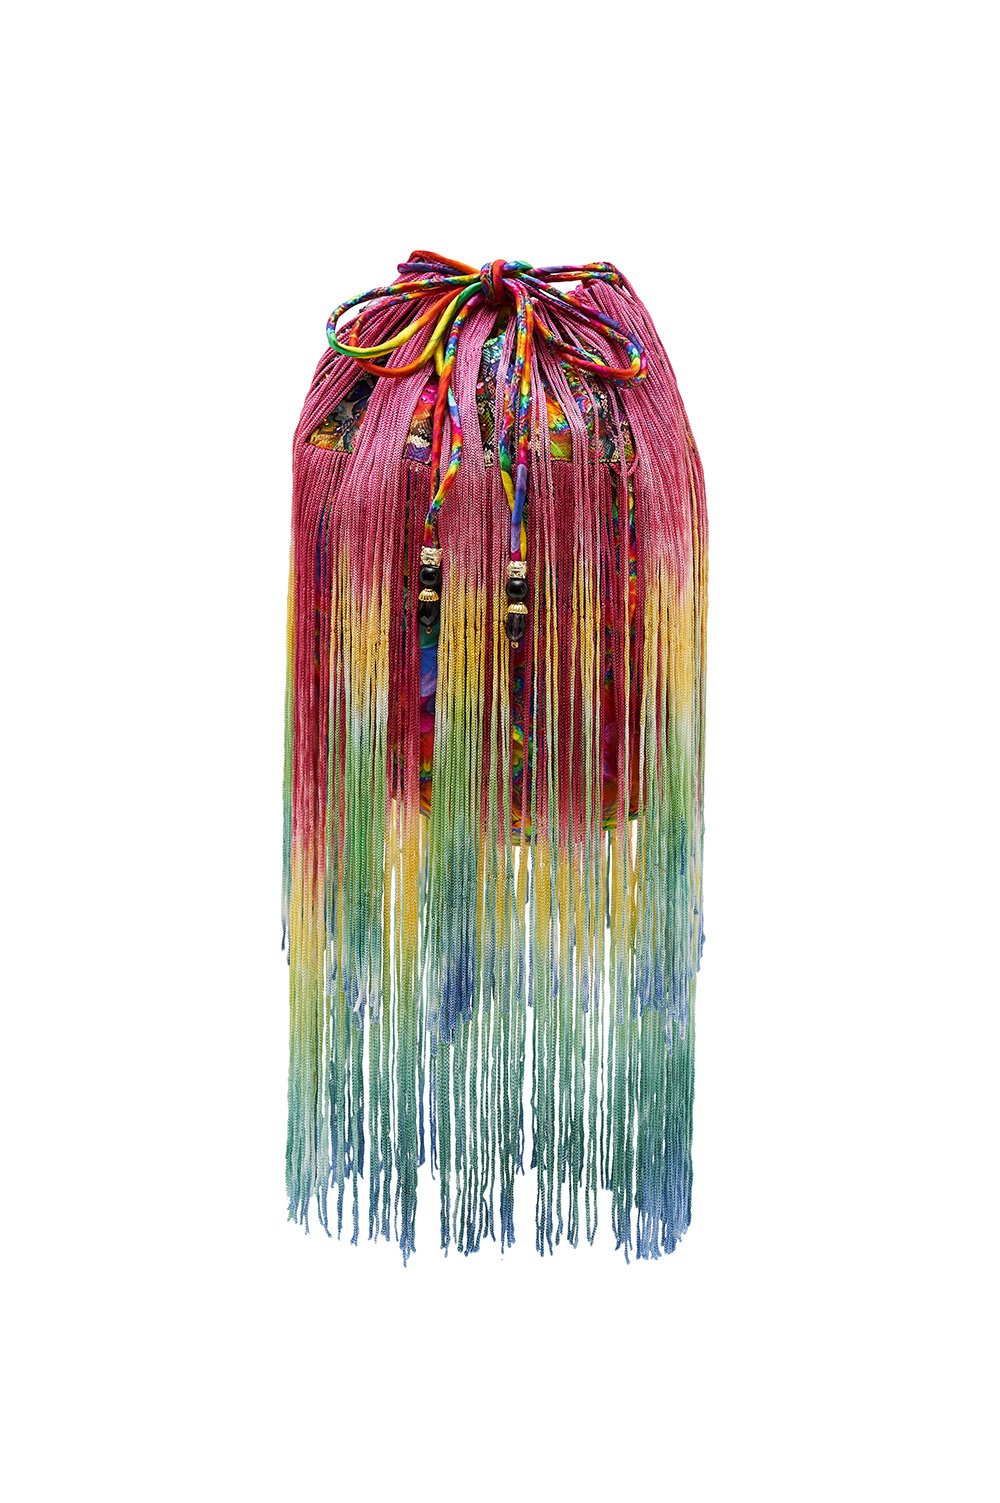 SILK POUCH WITH FRINGE COMING DOWN FROM COSMOS